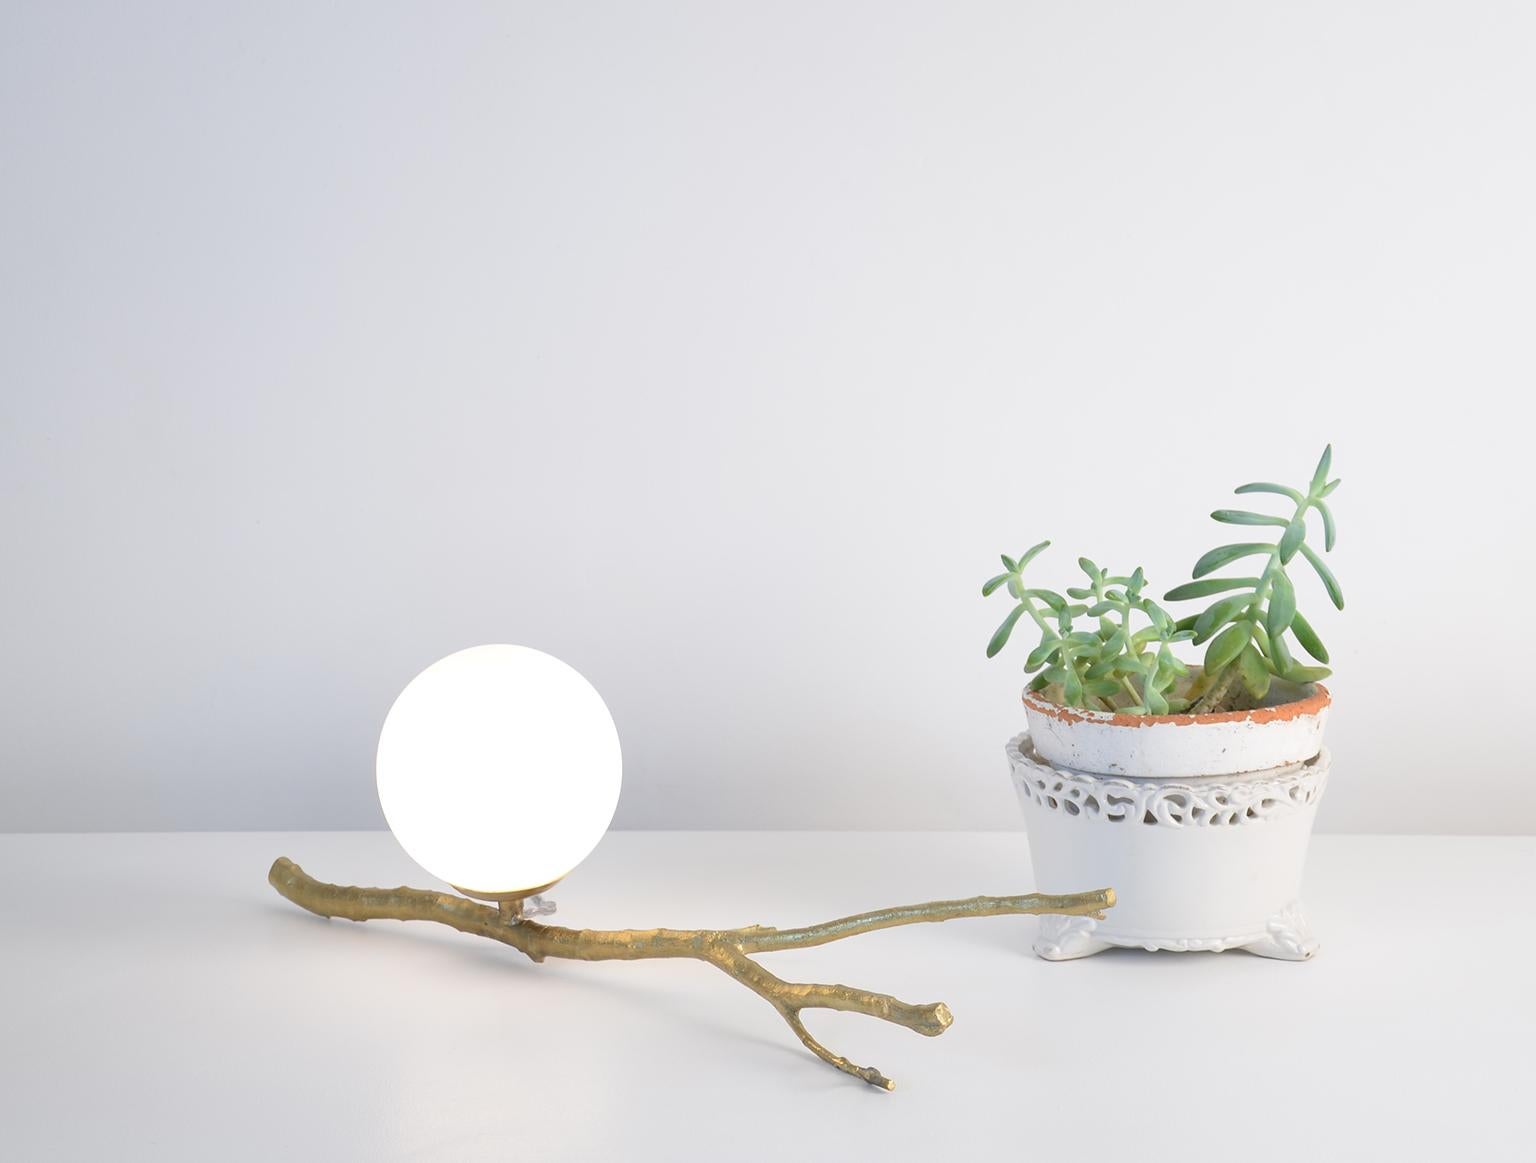 Sabiá Brazilian contemporary poetic minimalist table lamp in bronze cast design by Cristiana Bertolucci
Table lamp produced in cast bronze.
Literal inspiration of nature, the Sabia lamp line is produced in cast bronze where the twig itself serves as